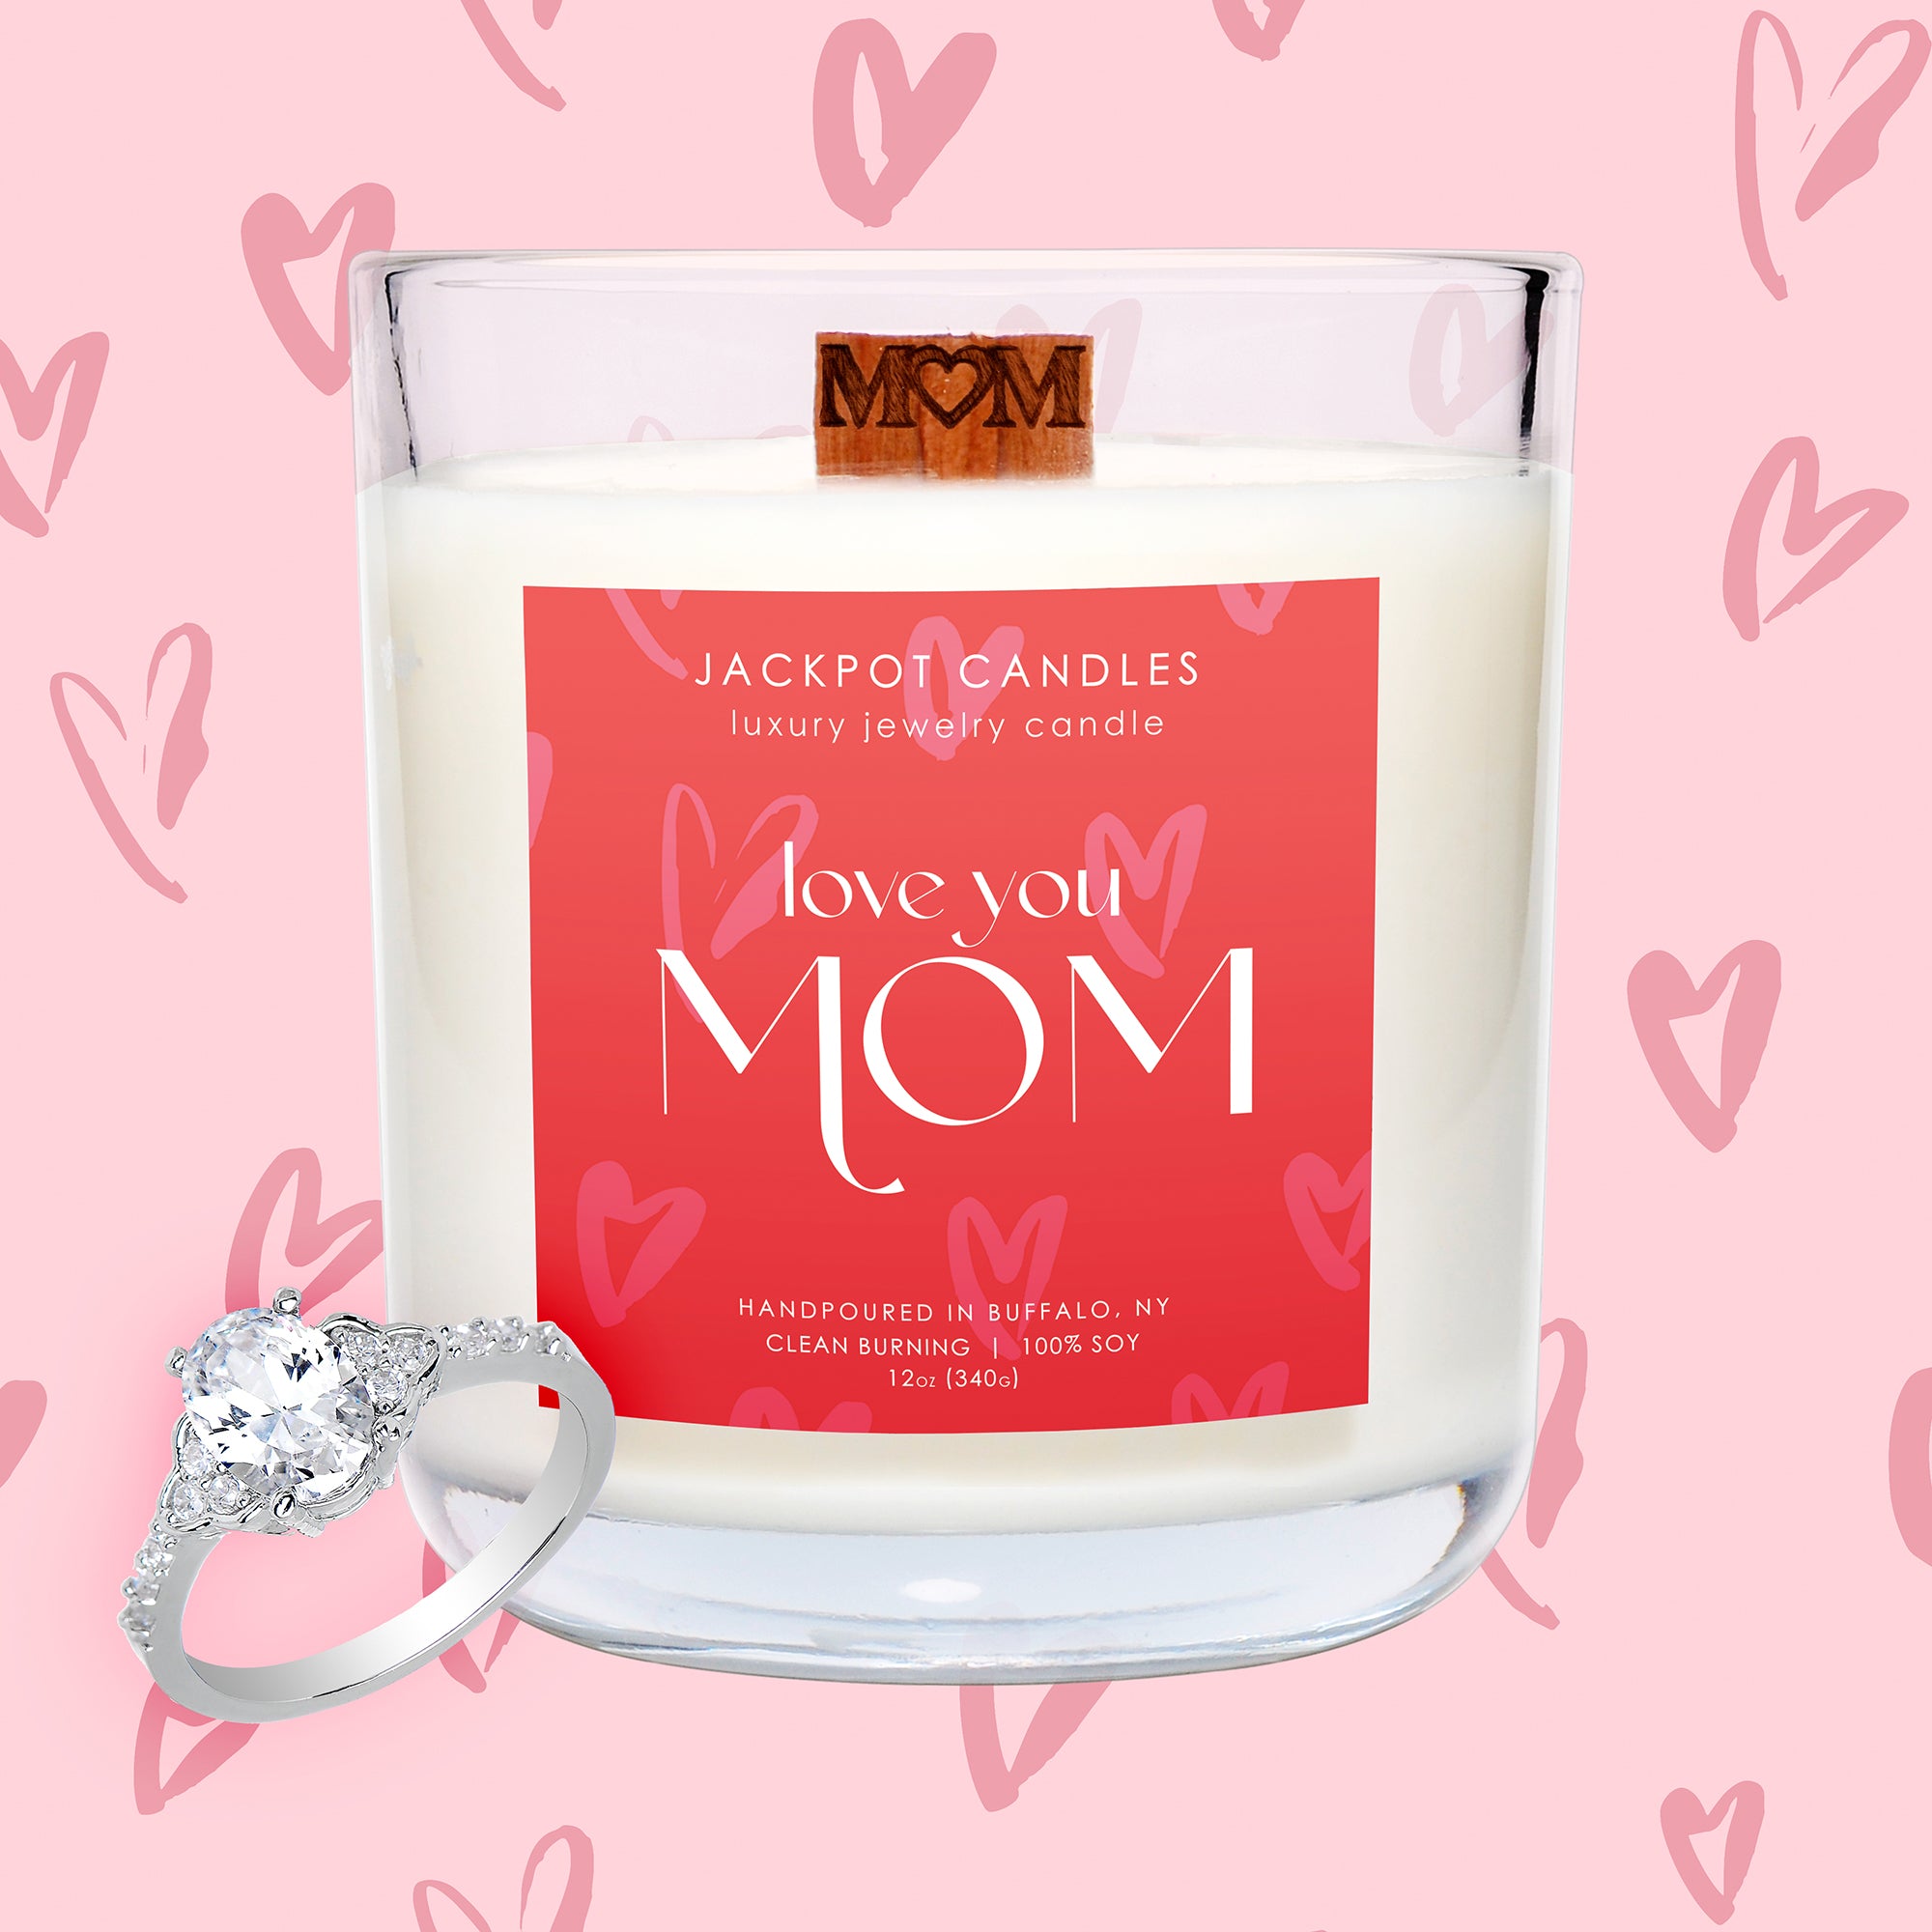 DIY Candles Every New Mom Will Love